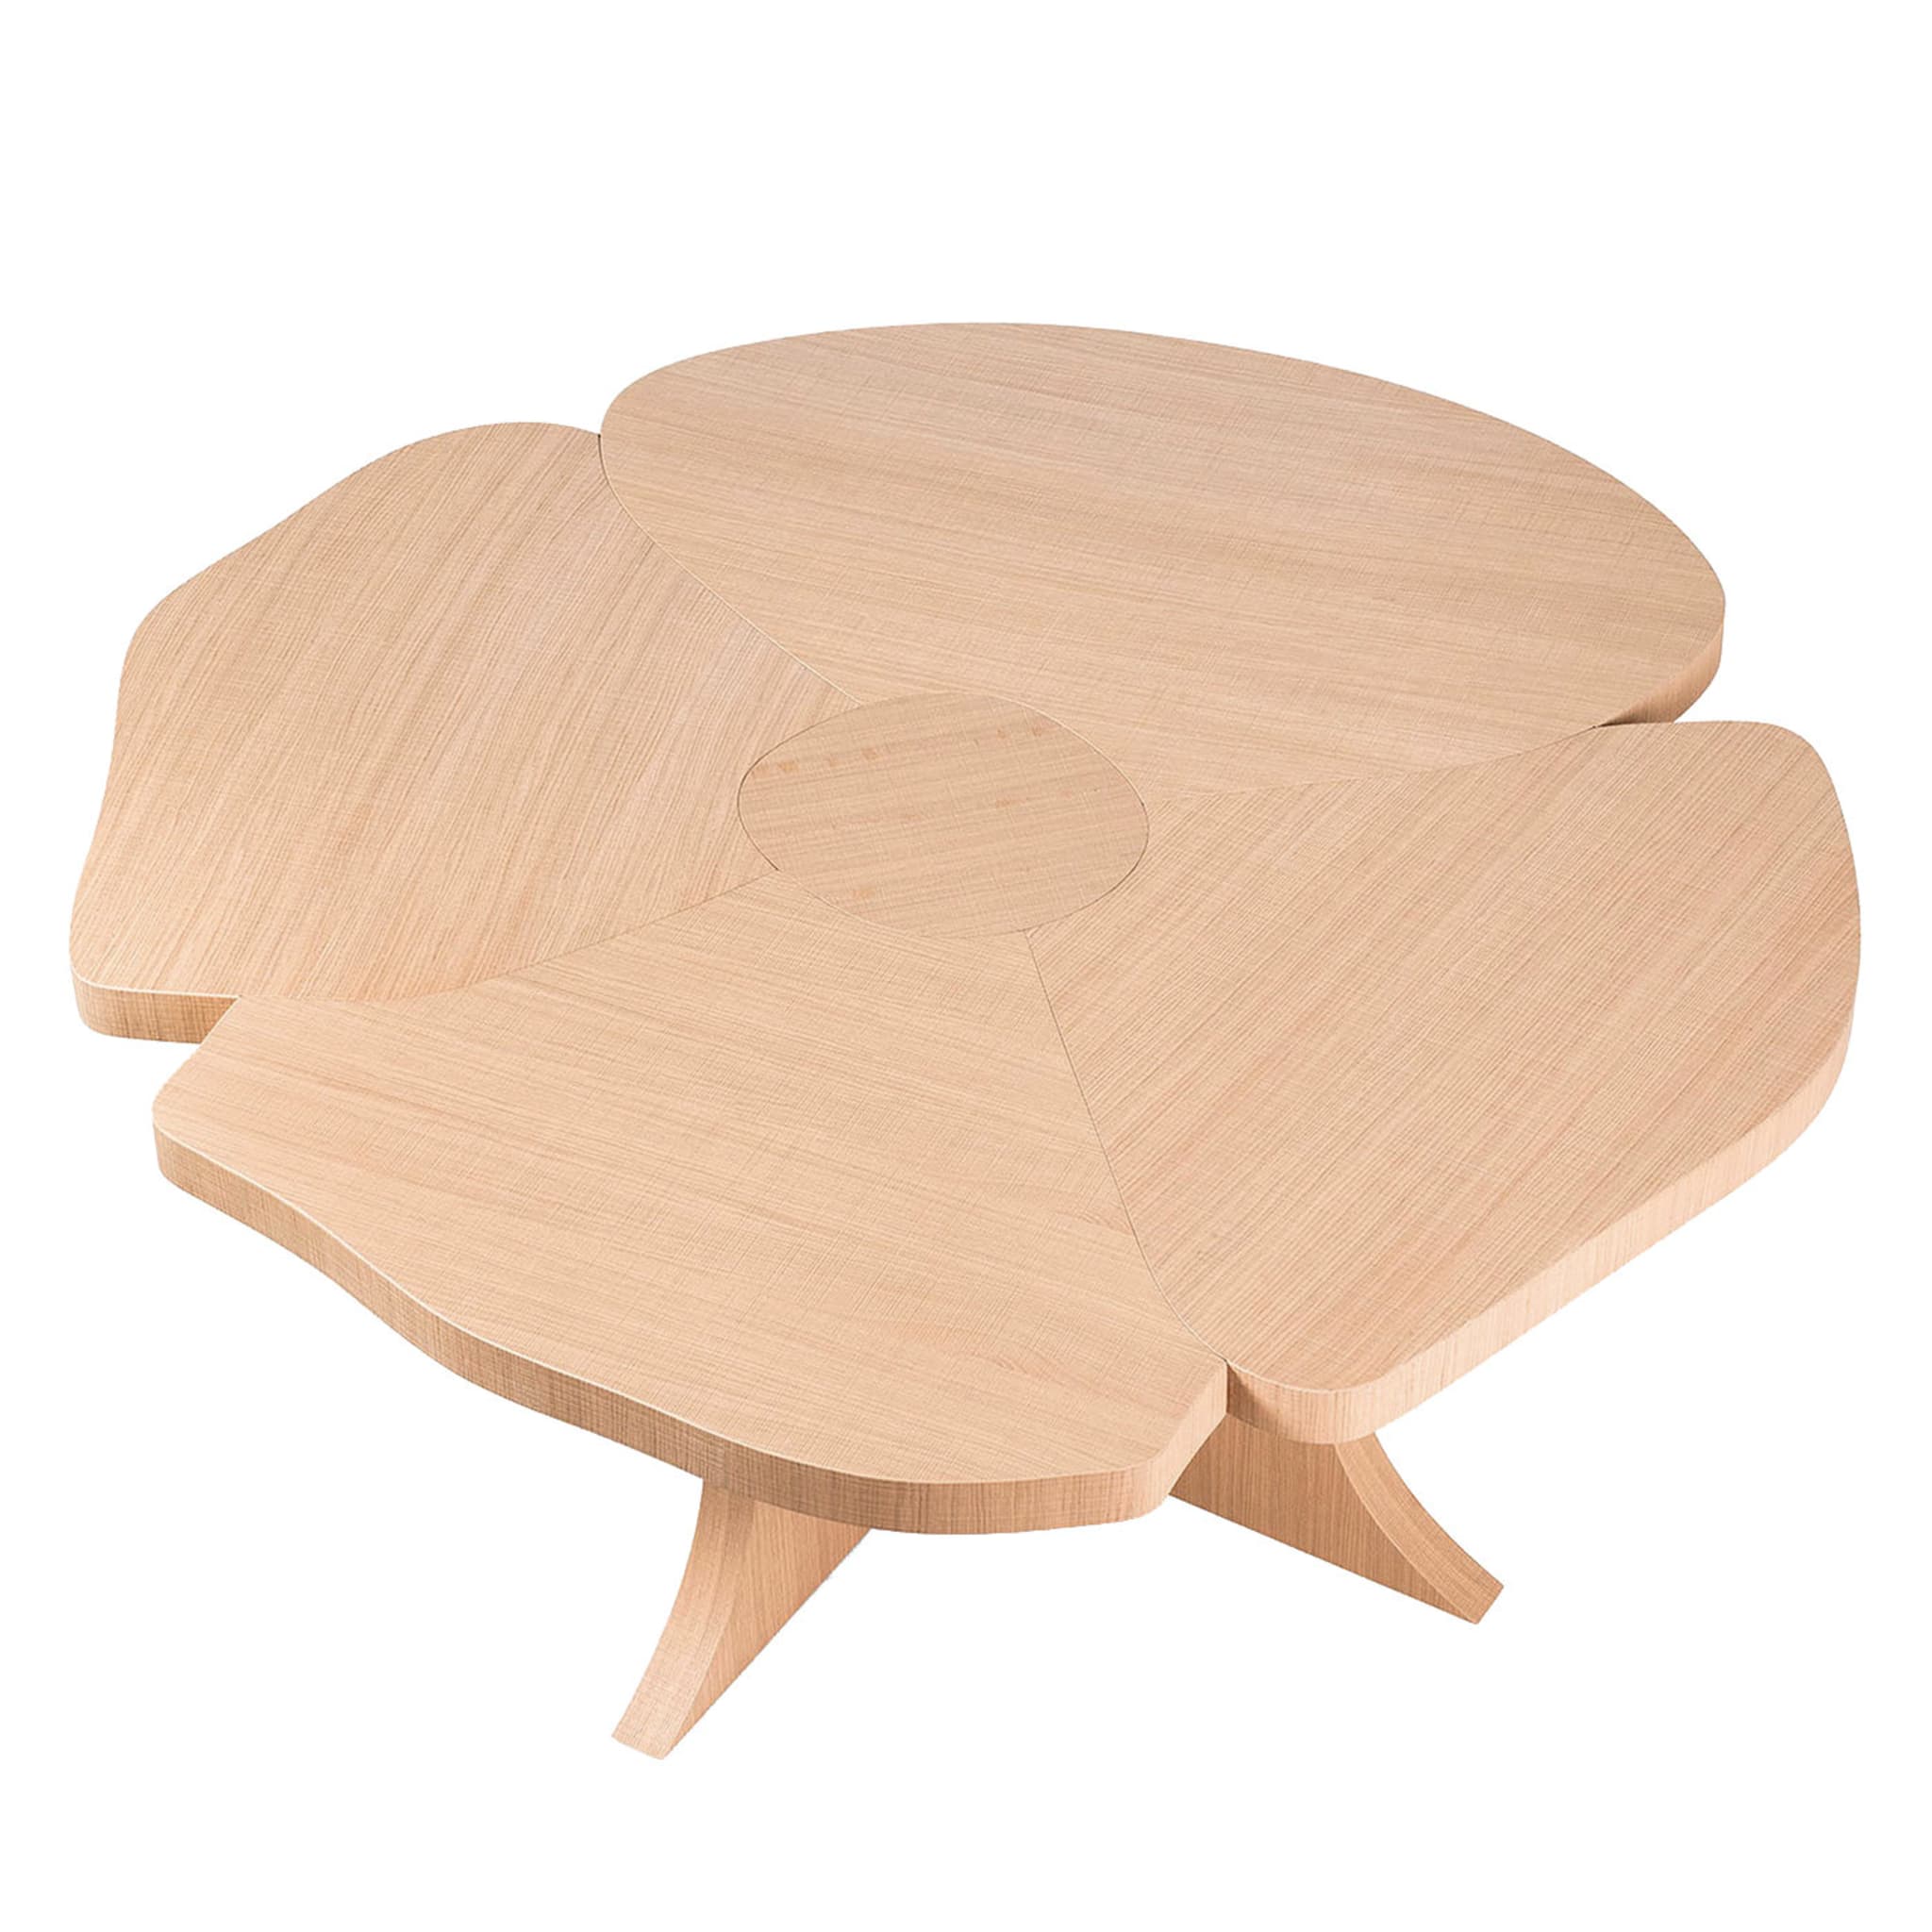 Andy Natural Dining Table - Alternative view 2